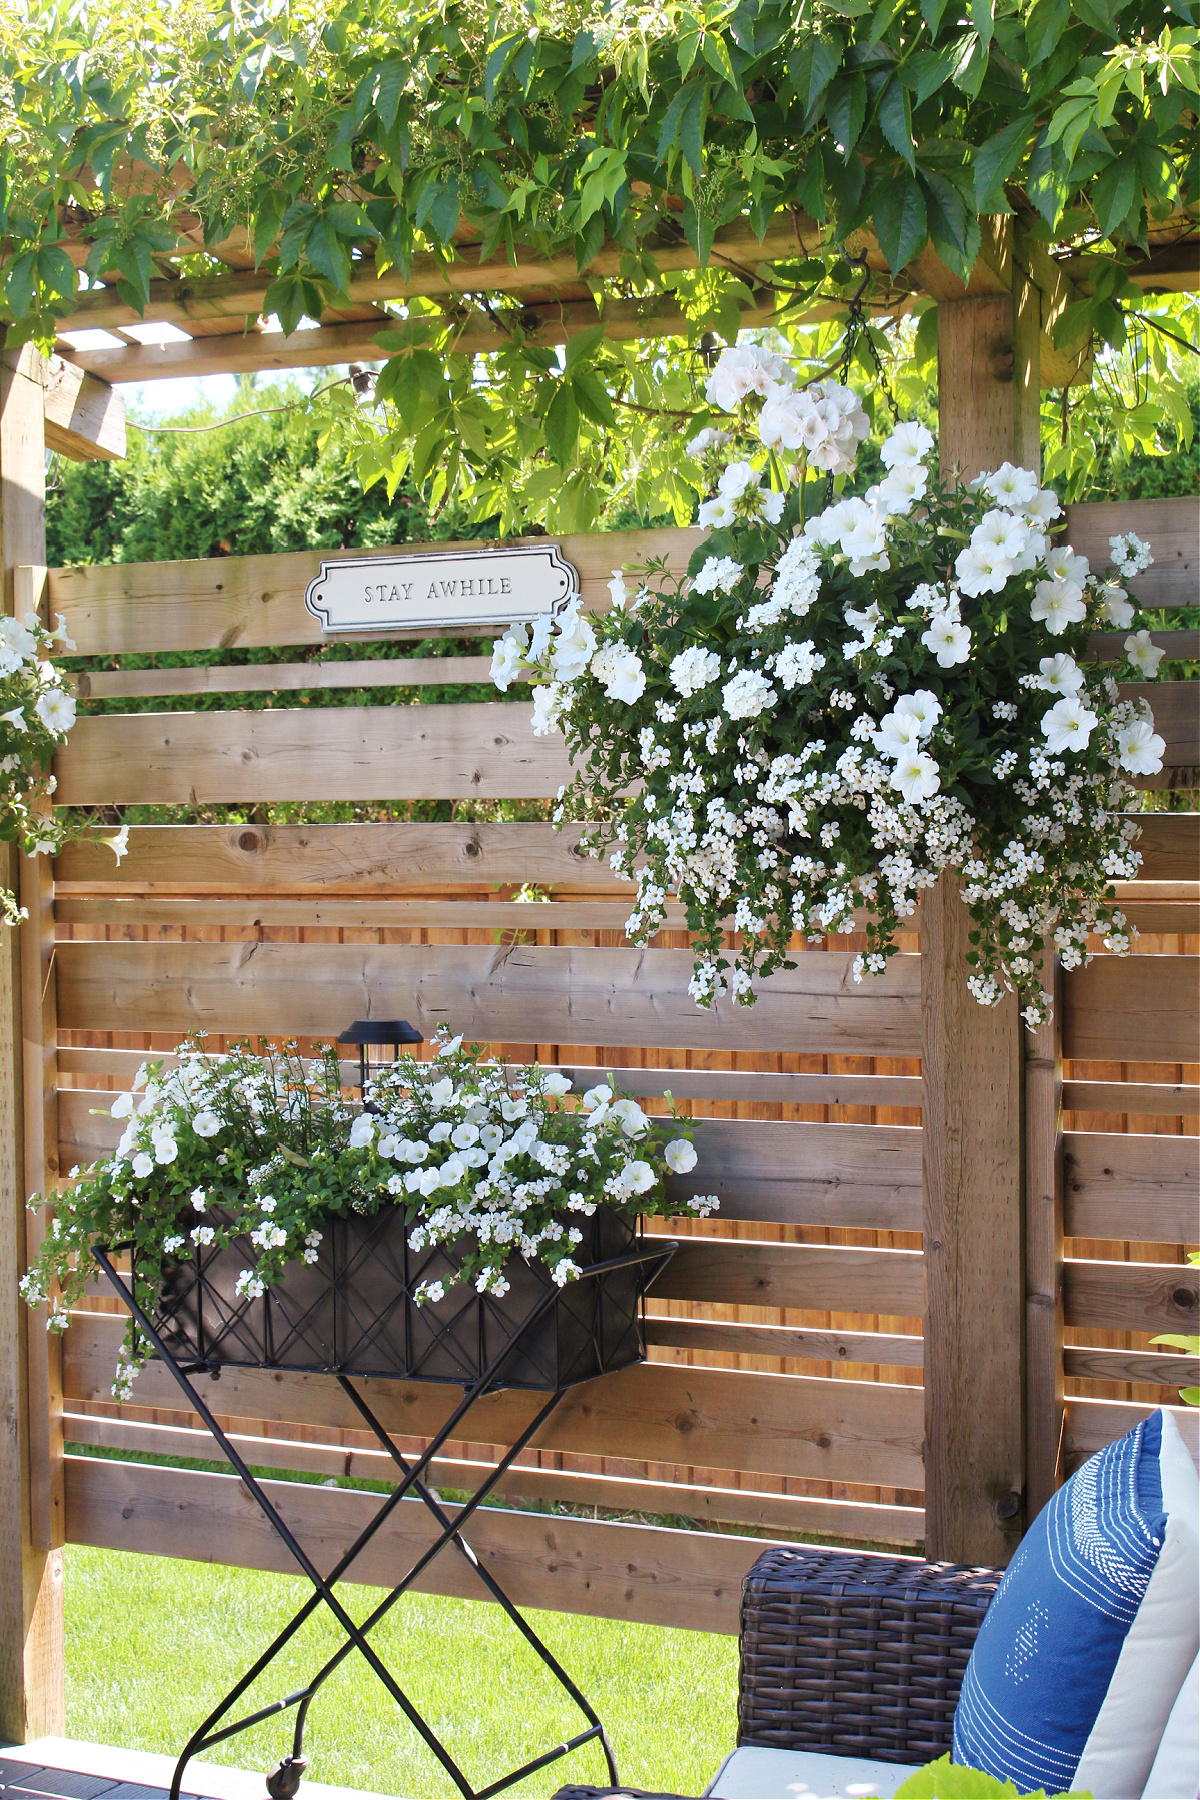 Beautiful white summer flower hanging baskets and planters.